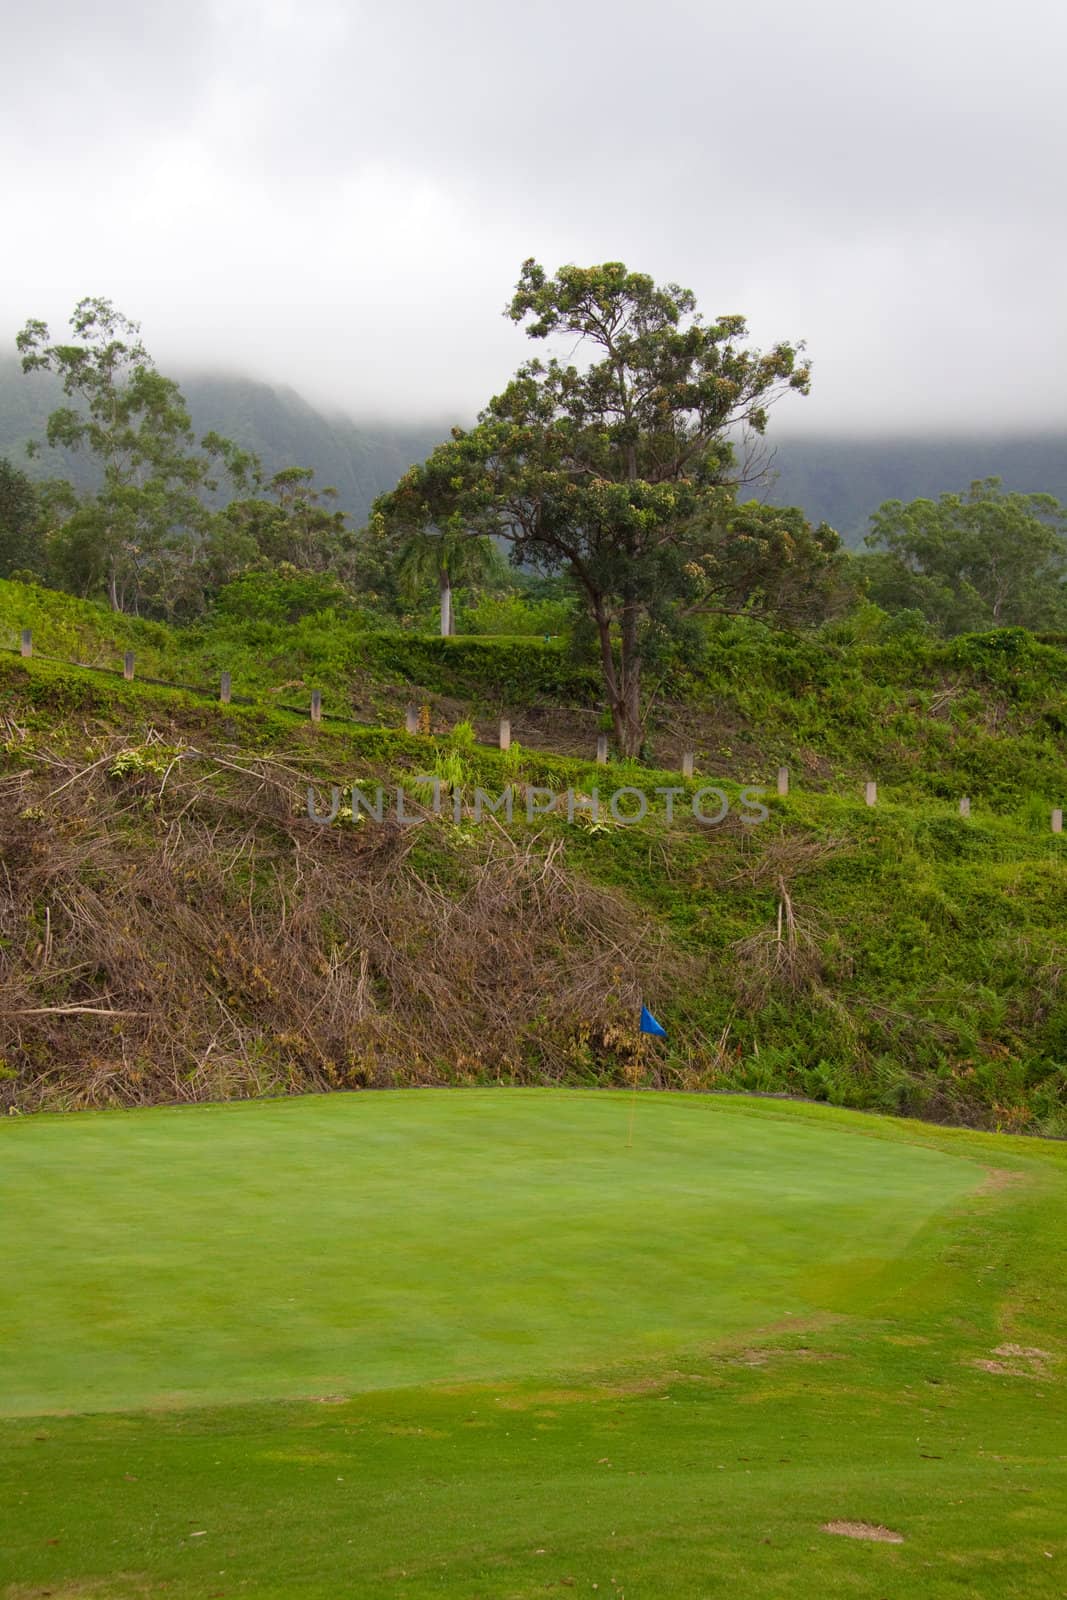 A great tropical golf course on oahu hawaii in the middle of a rainforest with magnificent greens and well manicured fairways.